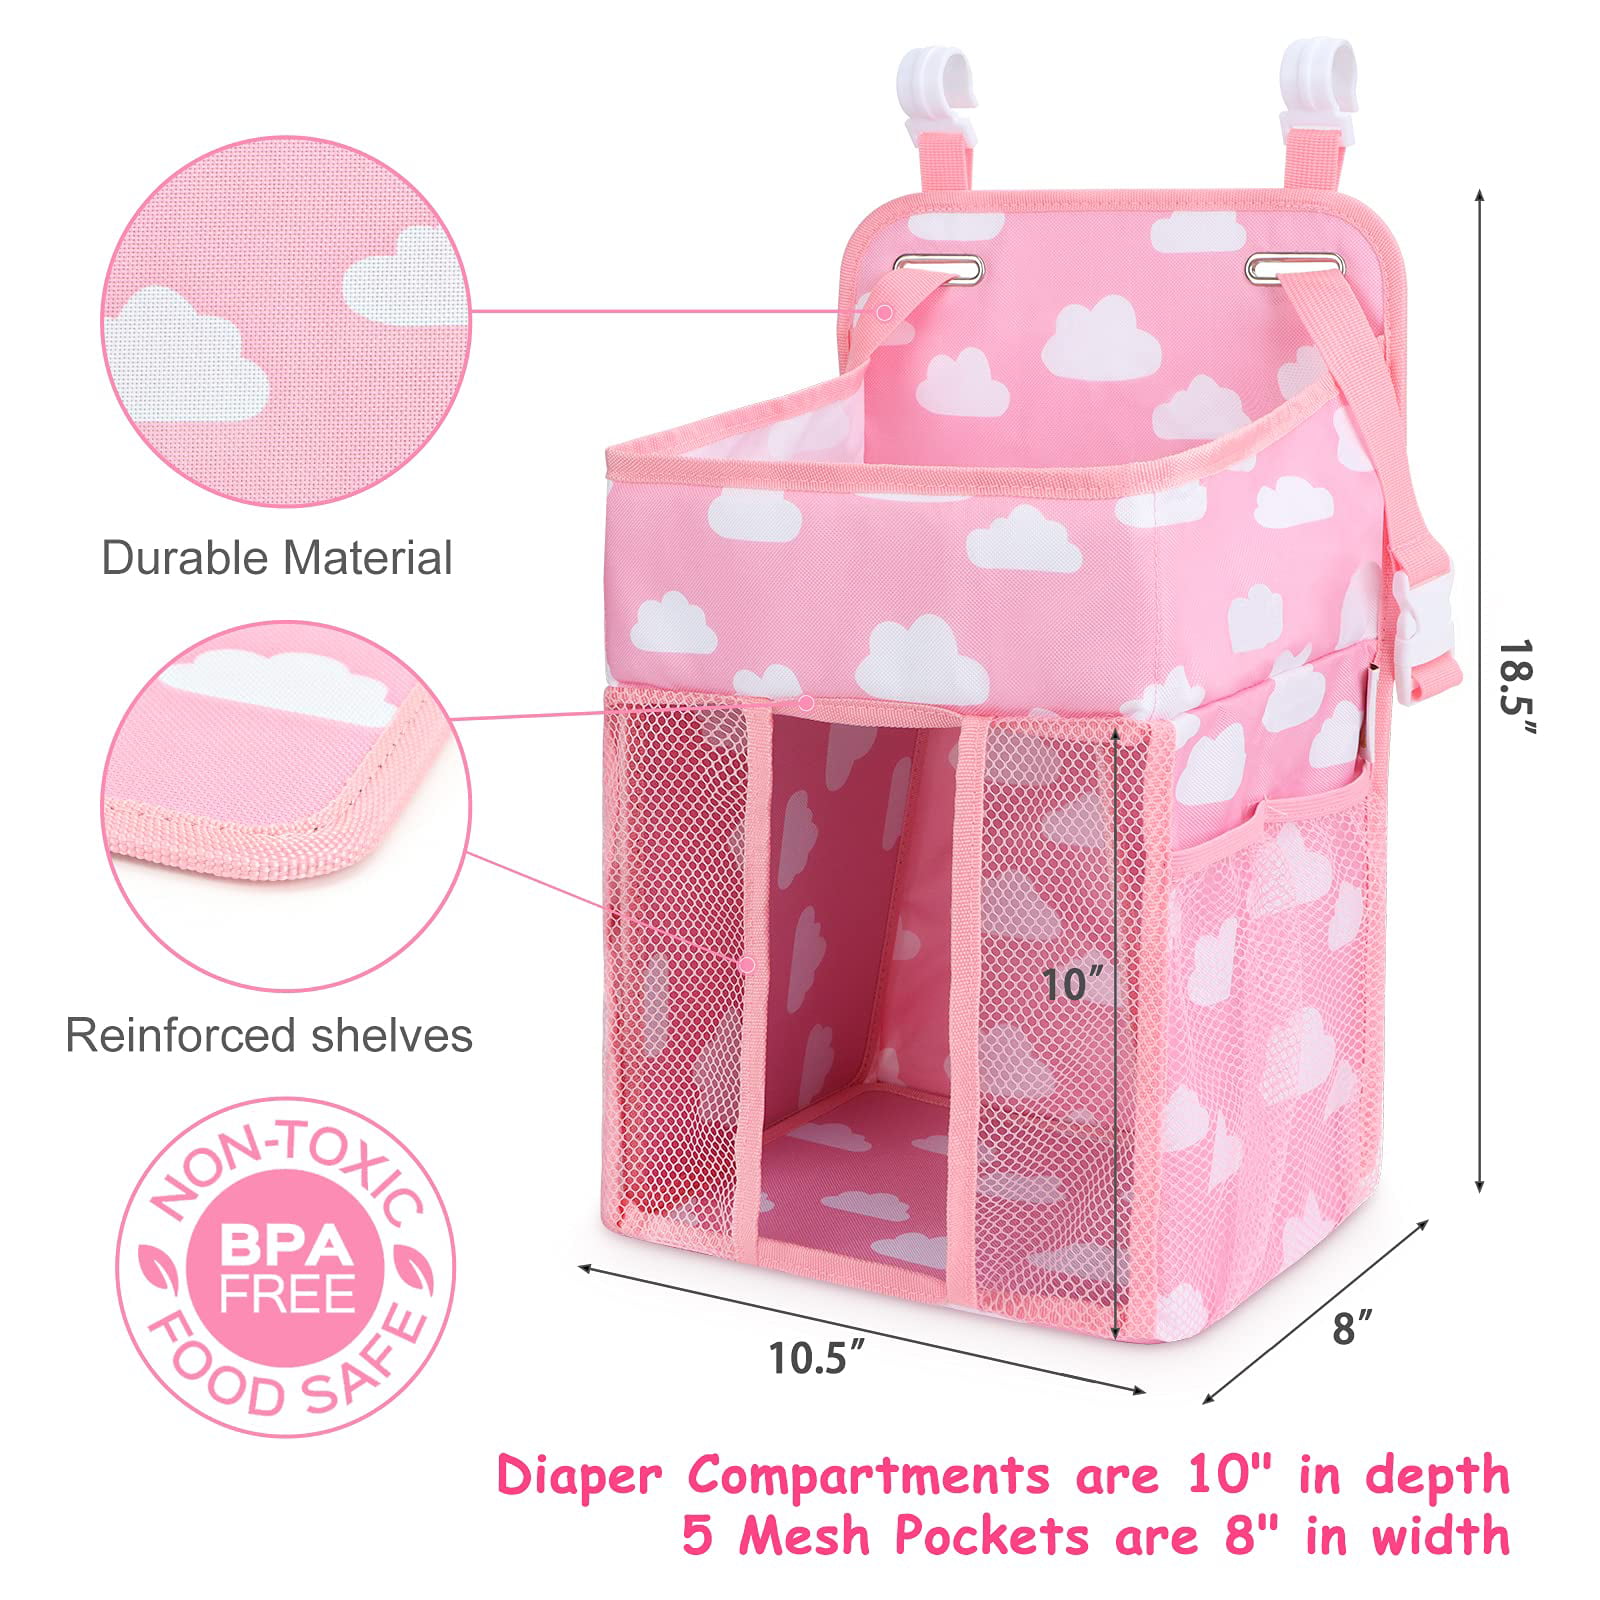 Hiccapop Nursery Organizer and Baby Diaper Caddy | Hanging Diaper Organization Storage for